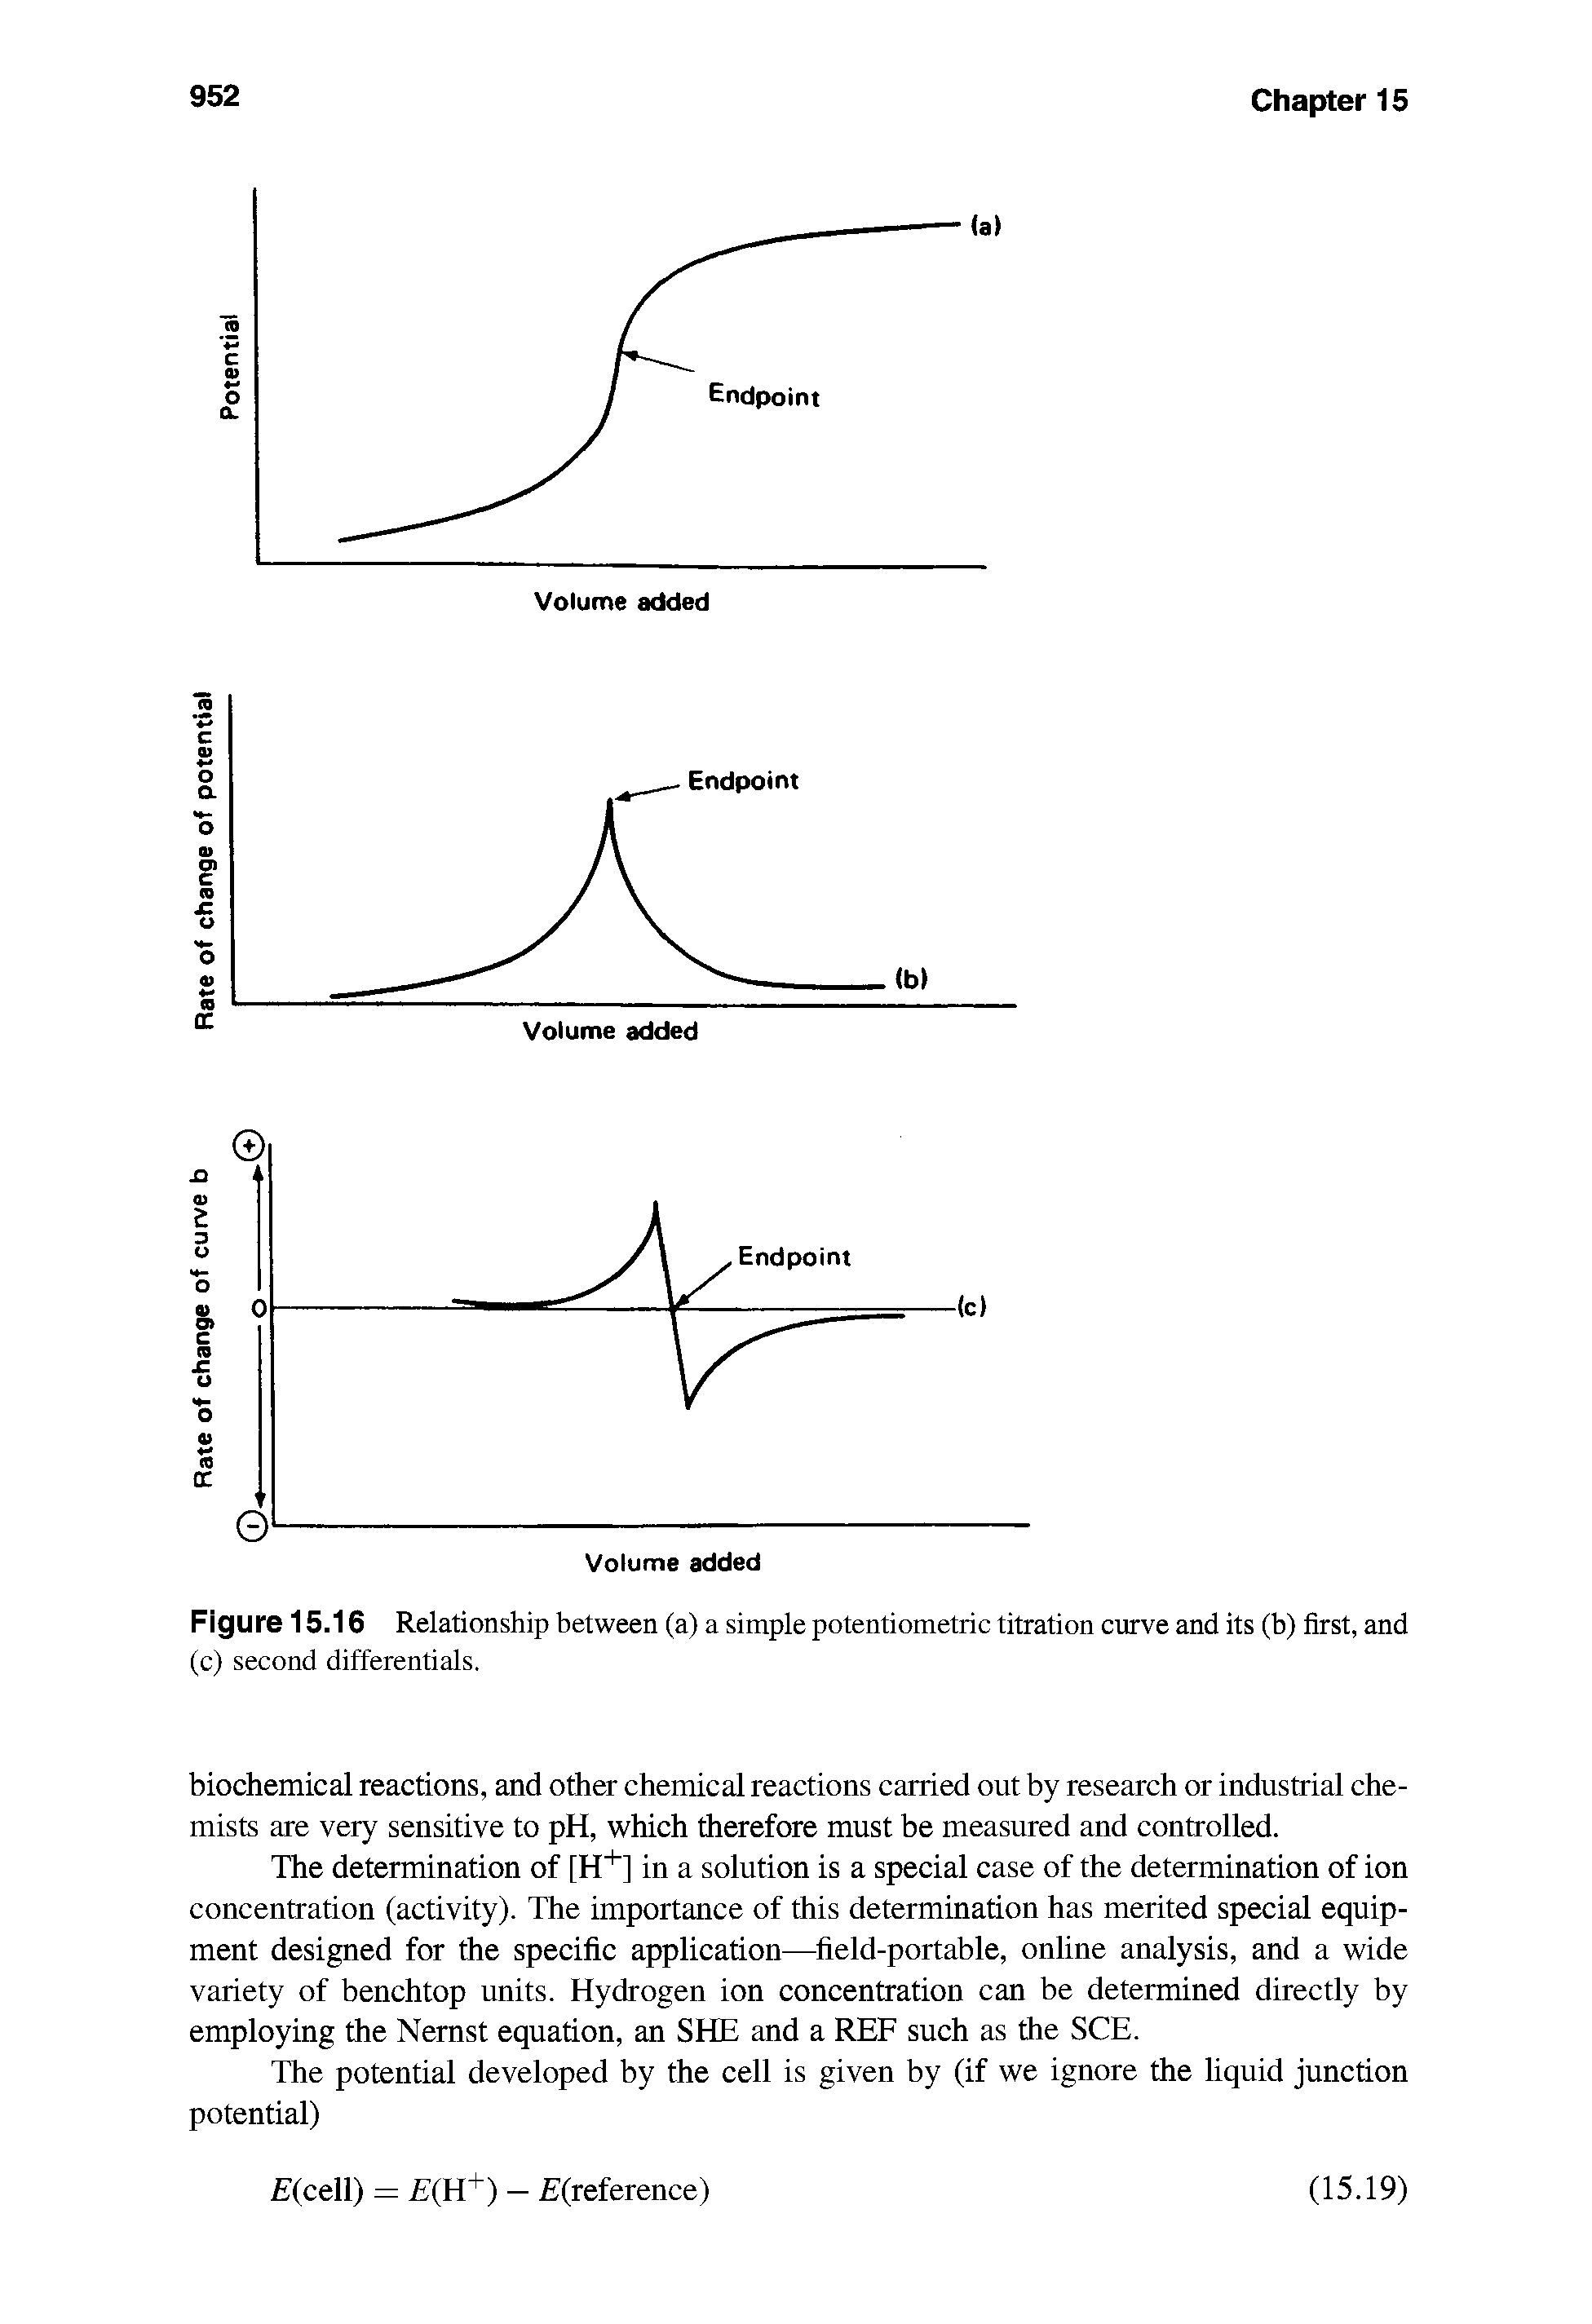 Figure 15.16 Relationship between (a) a simple potentiometric titration curve and its (b) first, and (c) second differentials.